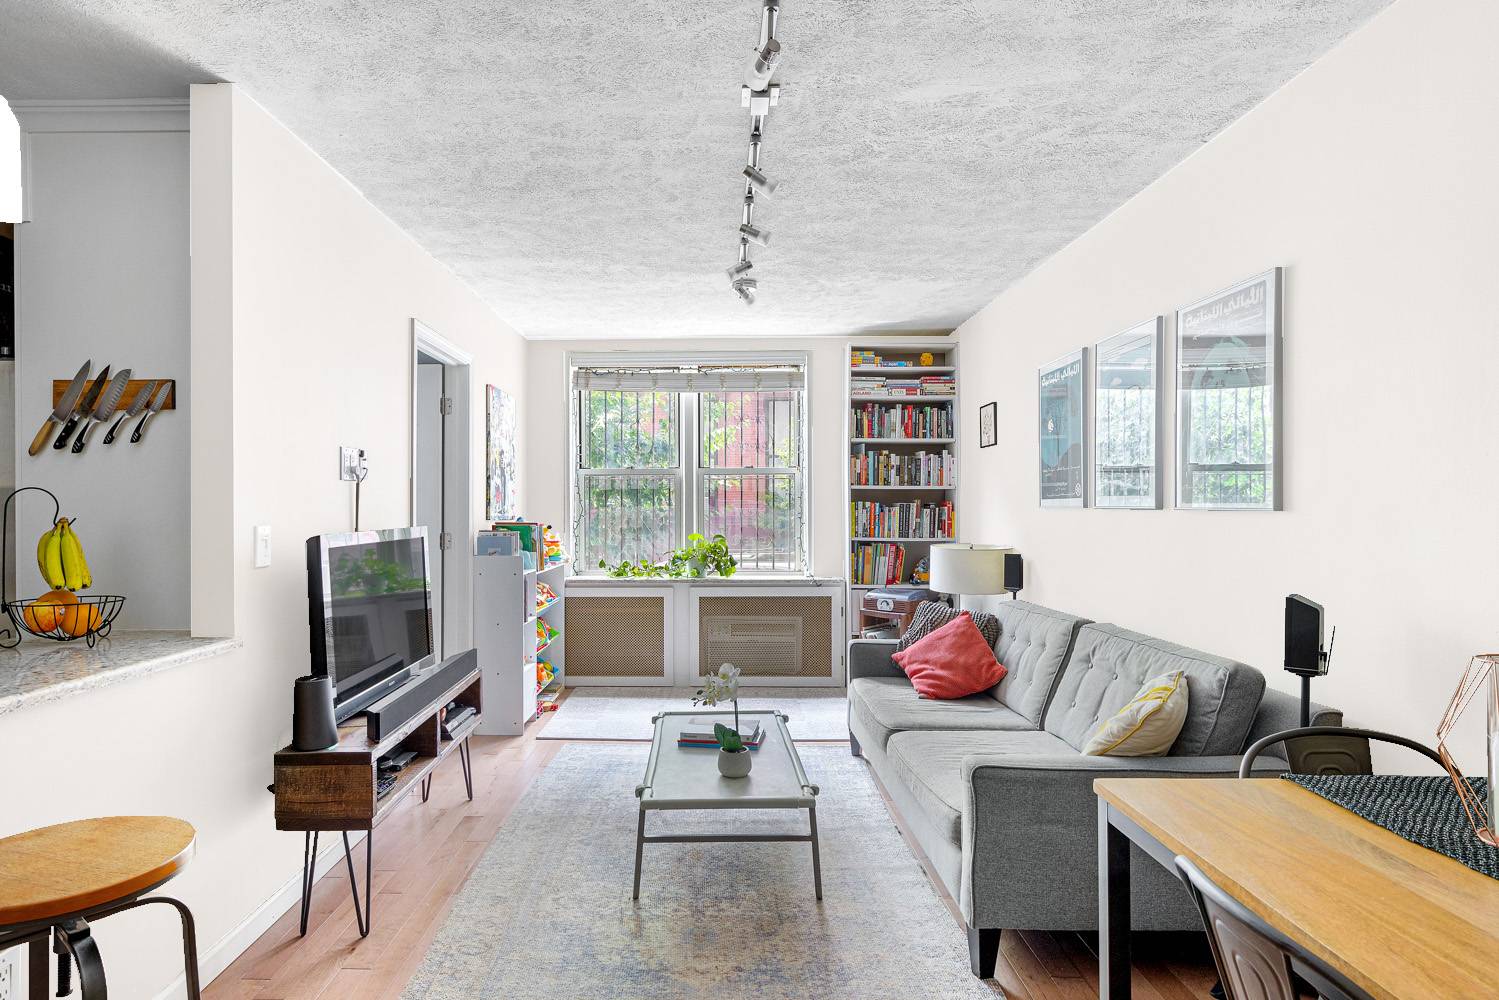 Fully renovated and move in ready 2 bedroom home, in a doorman building, nestled in the heart of historic Brooklyn Heights, on a charming, tree lined block.